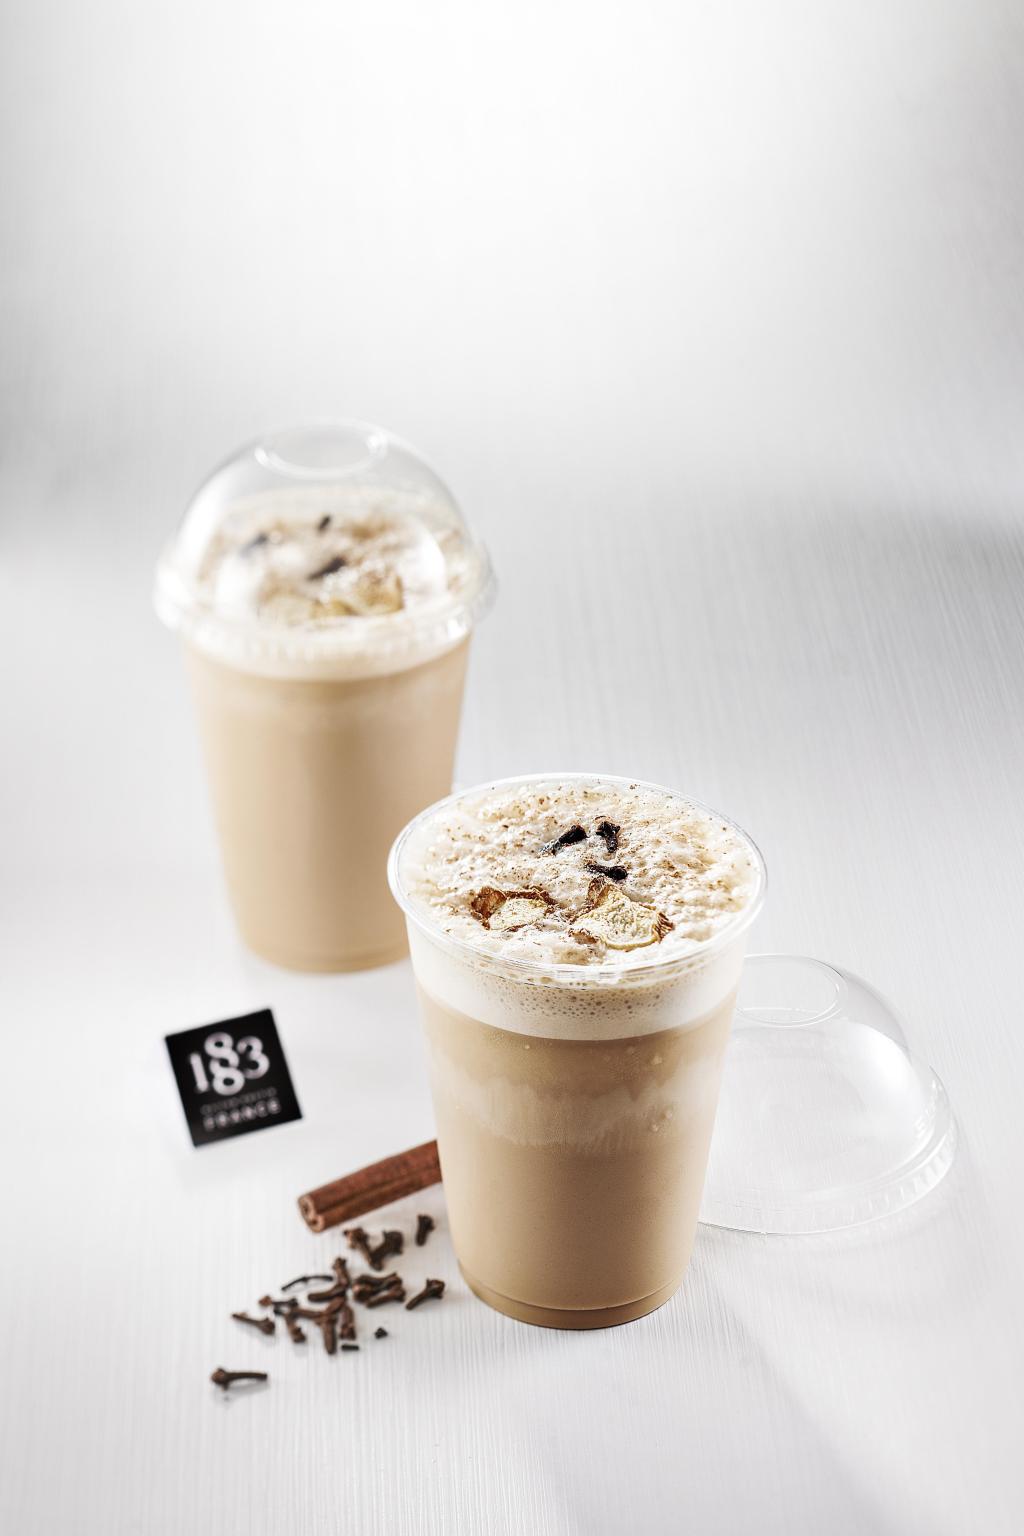 Coffee Vanilla Frappe Gourmet Syrups 1883 Maison Routin